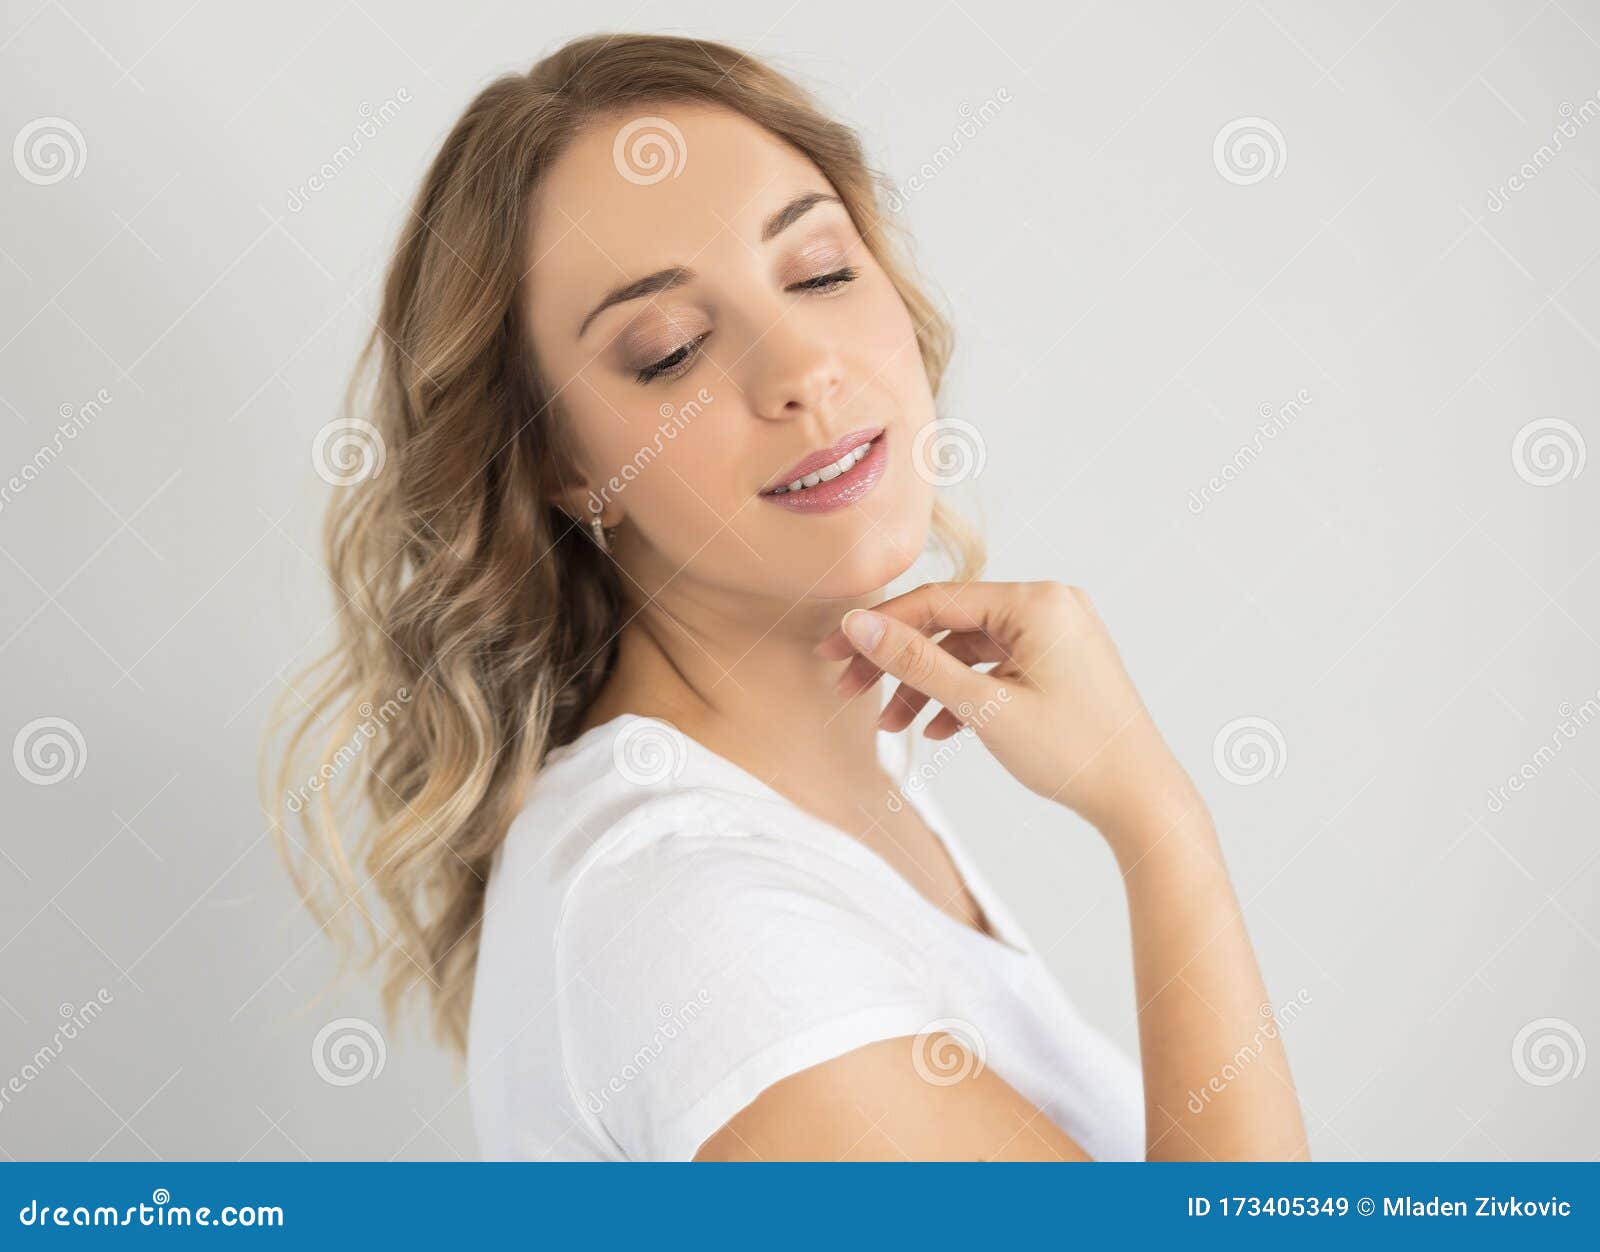 Her Beauty Is Simply Jaw Dropping Stock Image Image Of Body Pure 173405349